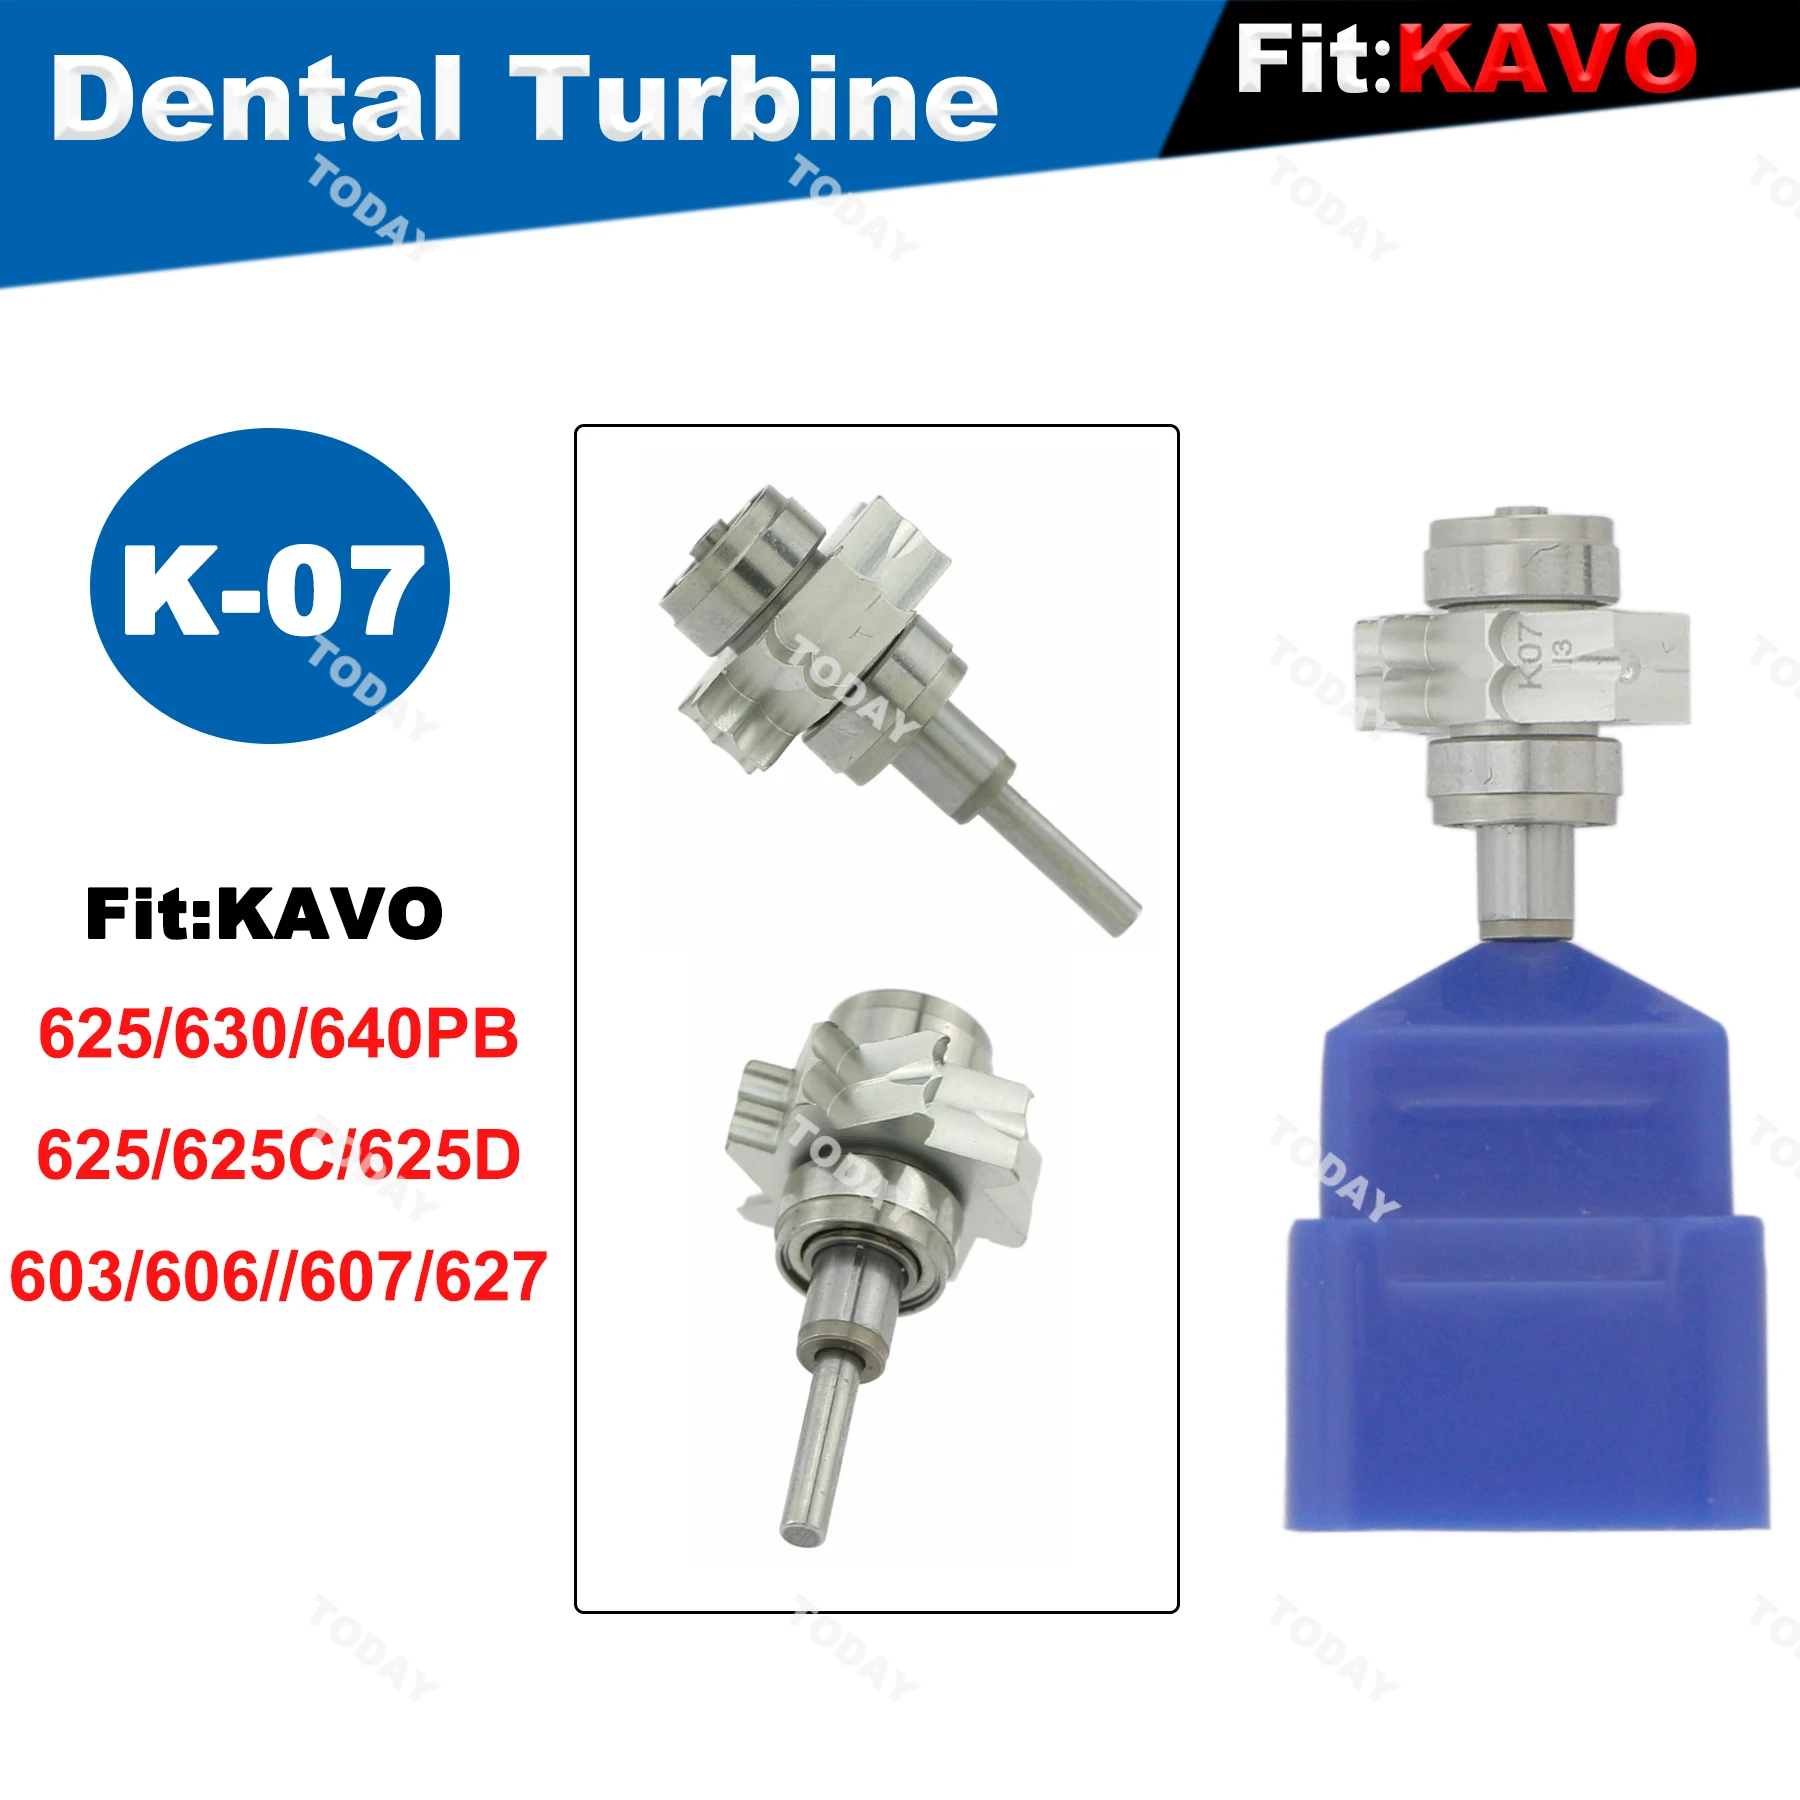 

COXO Dental Turbine Cartridge Air Rotor K-07 For KAVO High Speed Handpiece 625 630 640 603 606 607 627 Dentistry Accessories